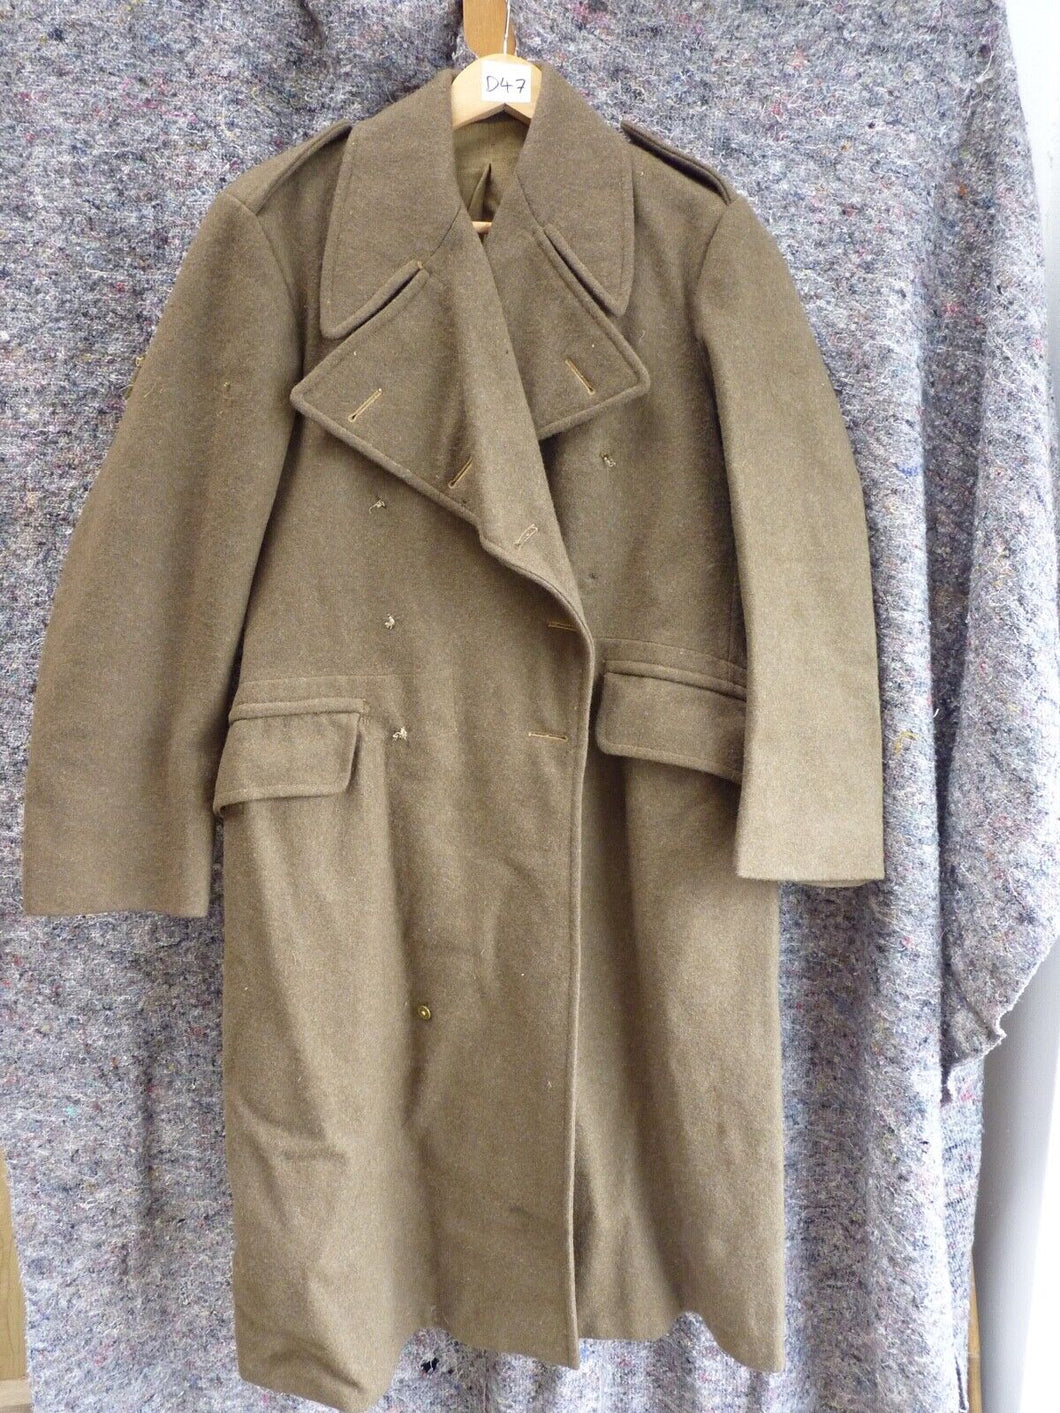 Original British Army Dismounted Greatcoat - Ideal for WW2 Display - 38